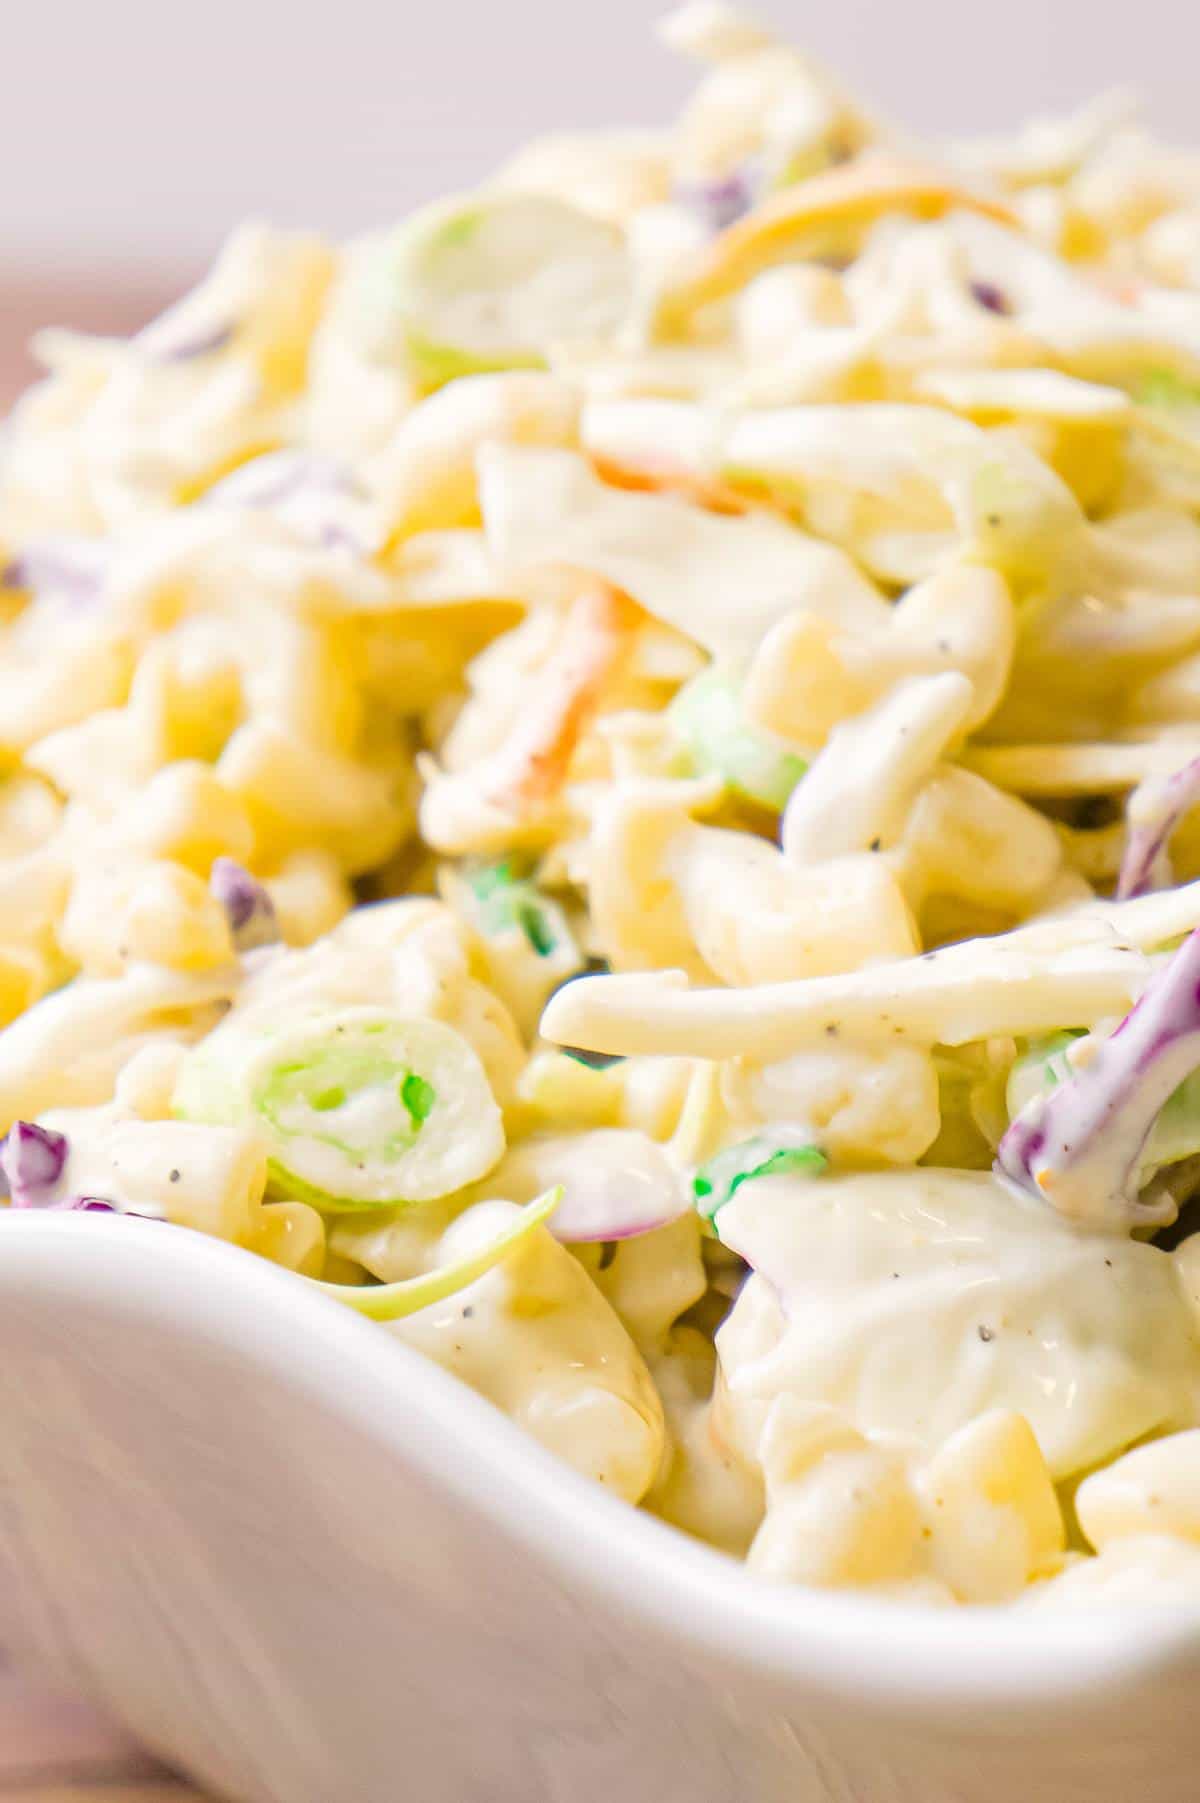 Coleslaw Macaroni Salad is a simple cold side dish recipe perfect for summer barbecues and potlucks.